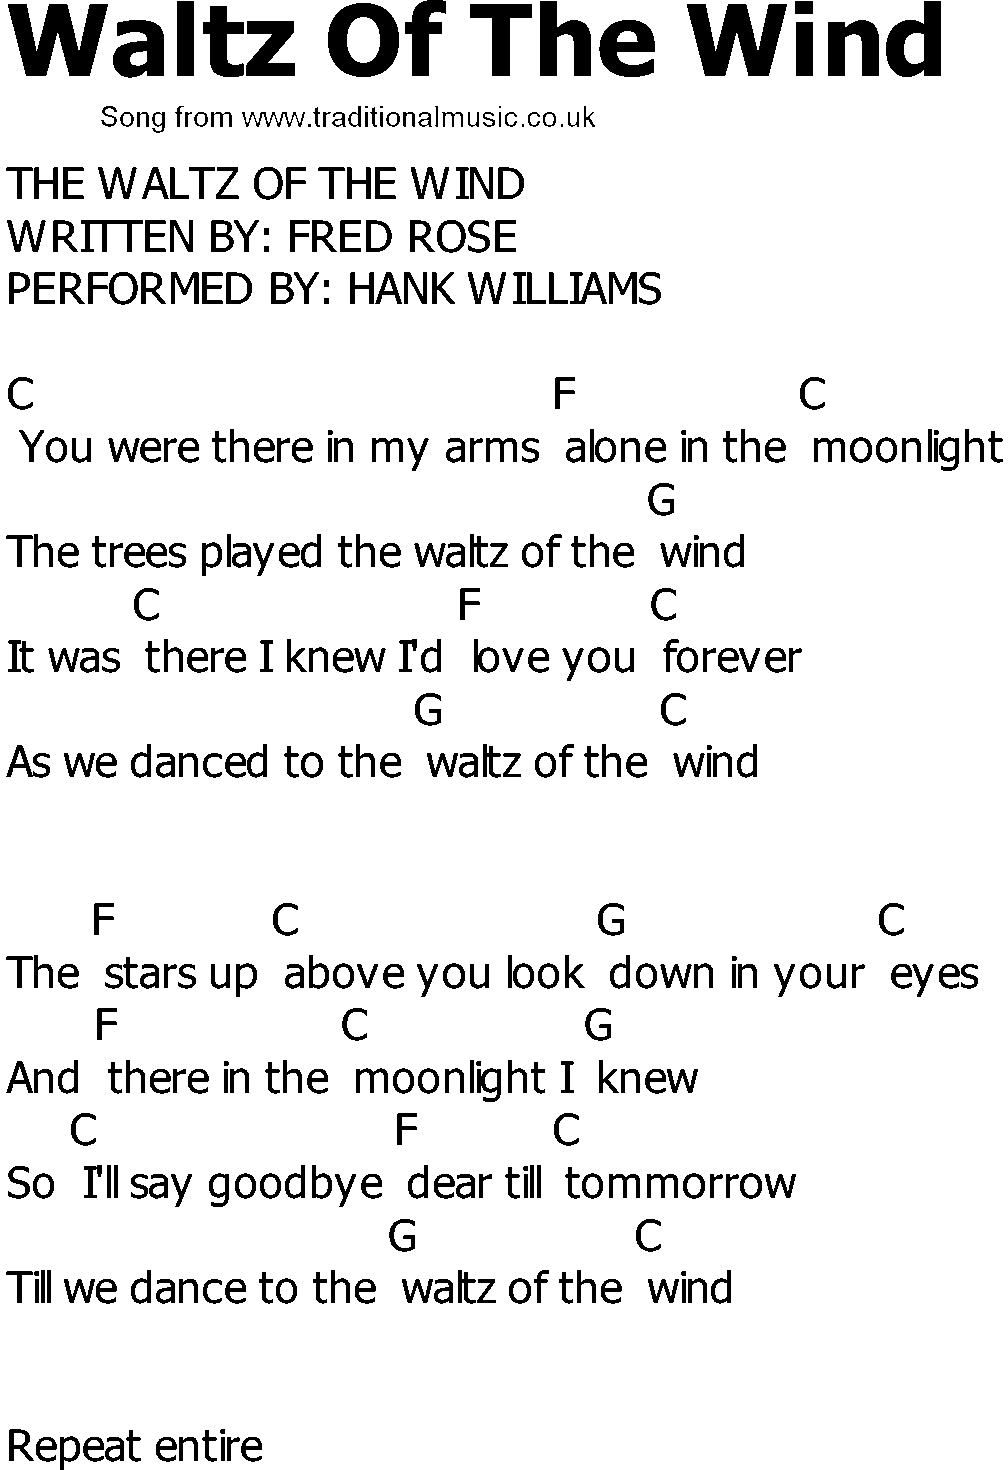 Old Country song lyrics with chords - Waltz Of The Wind